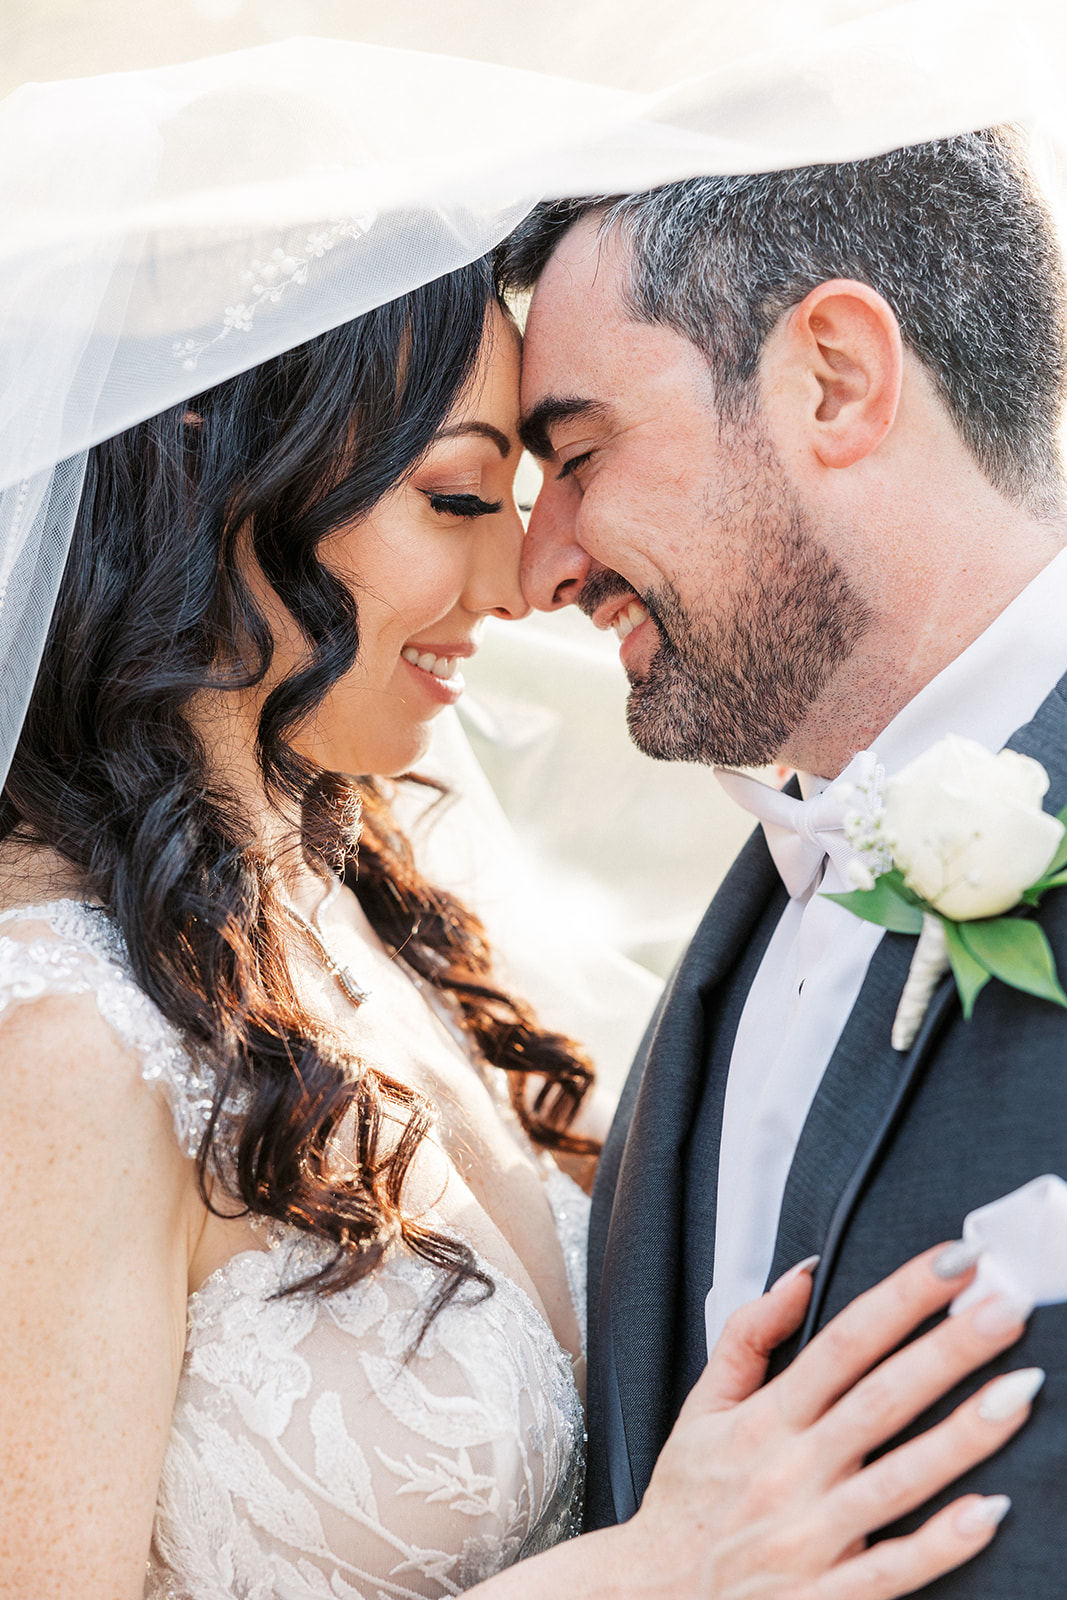 Newlyweds share an intimate moment together hiding under a veil